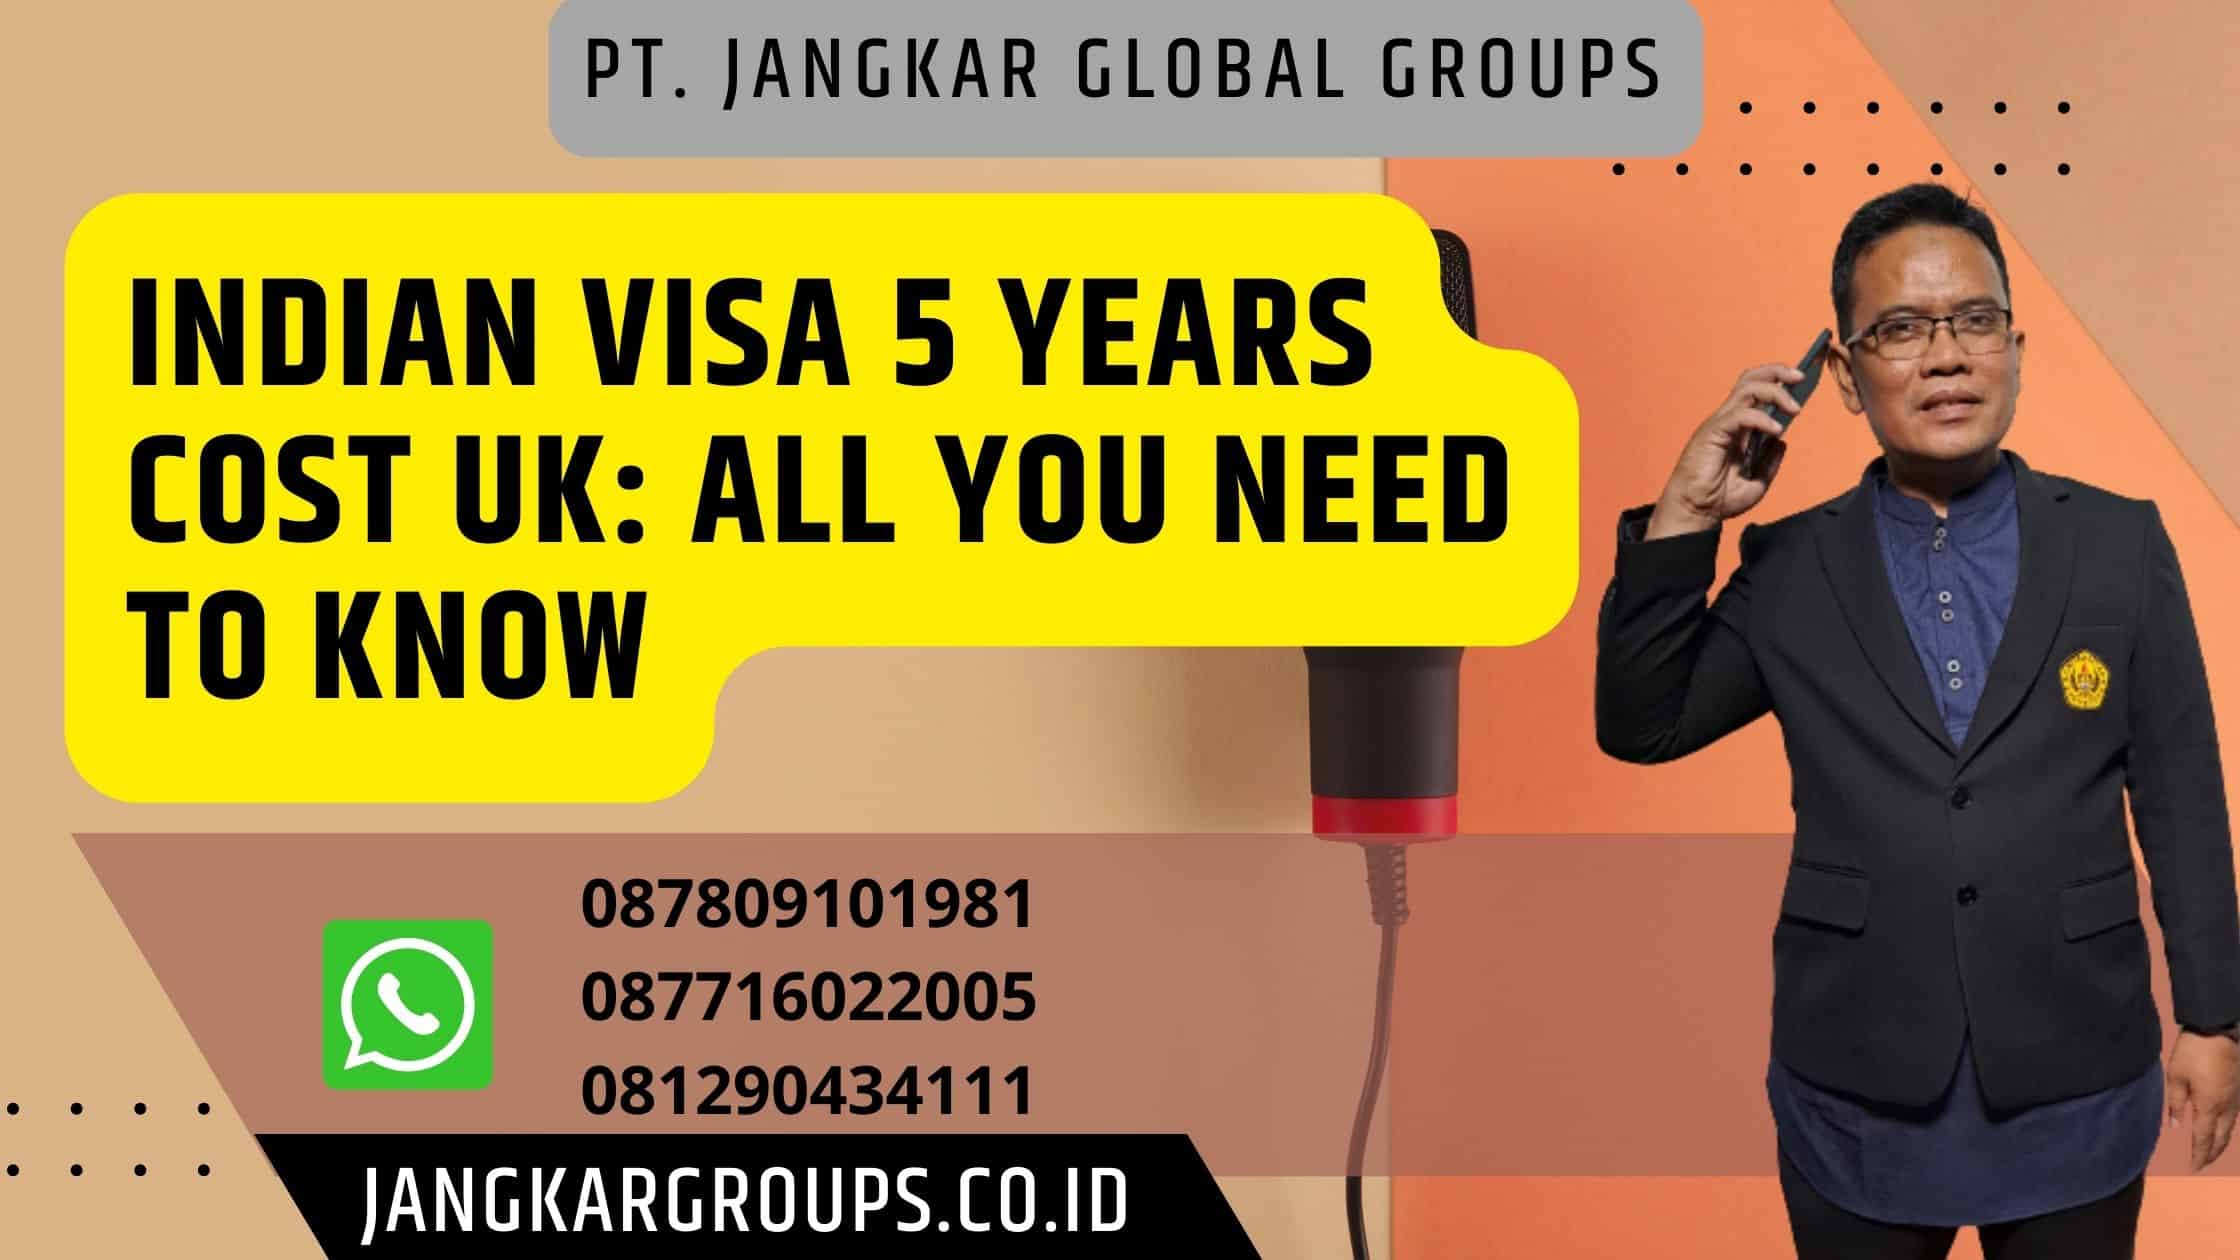 Indian Visa 5 Years Cost UK: All You Need to Know